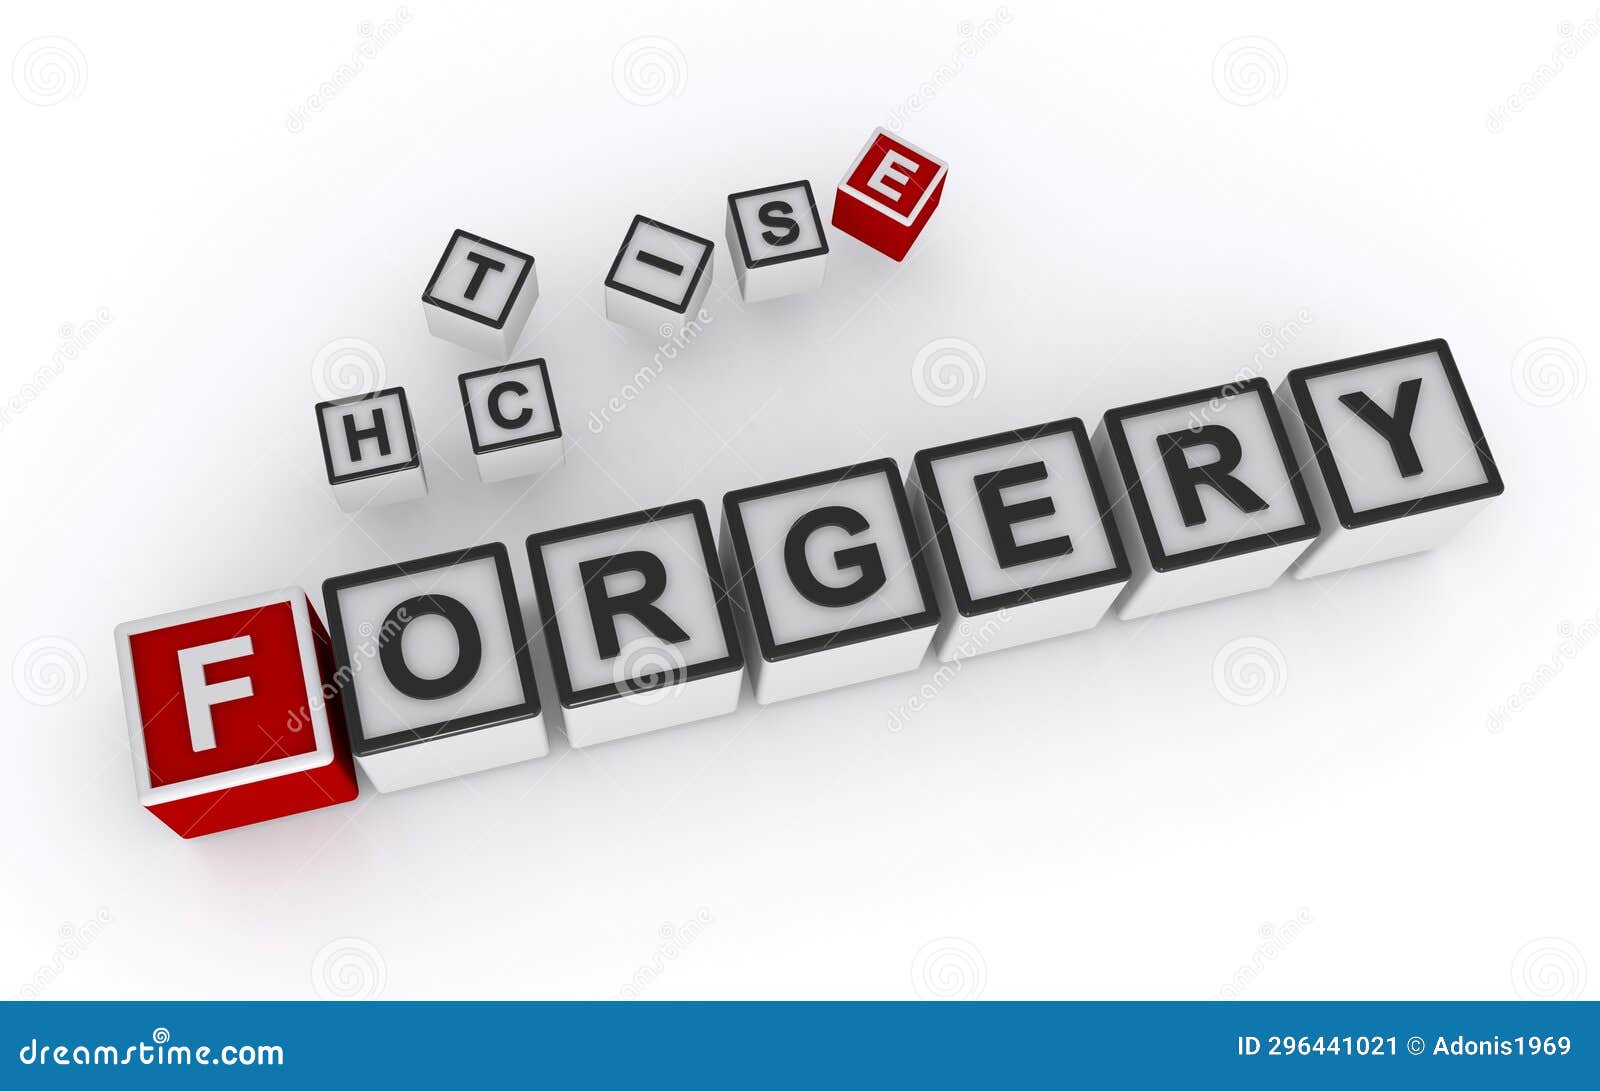 forgery word block on white